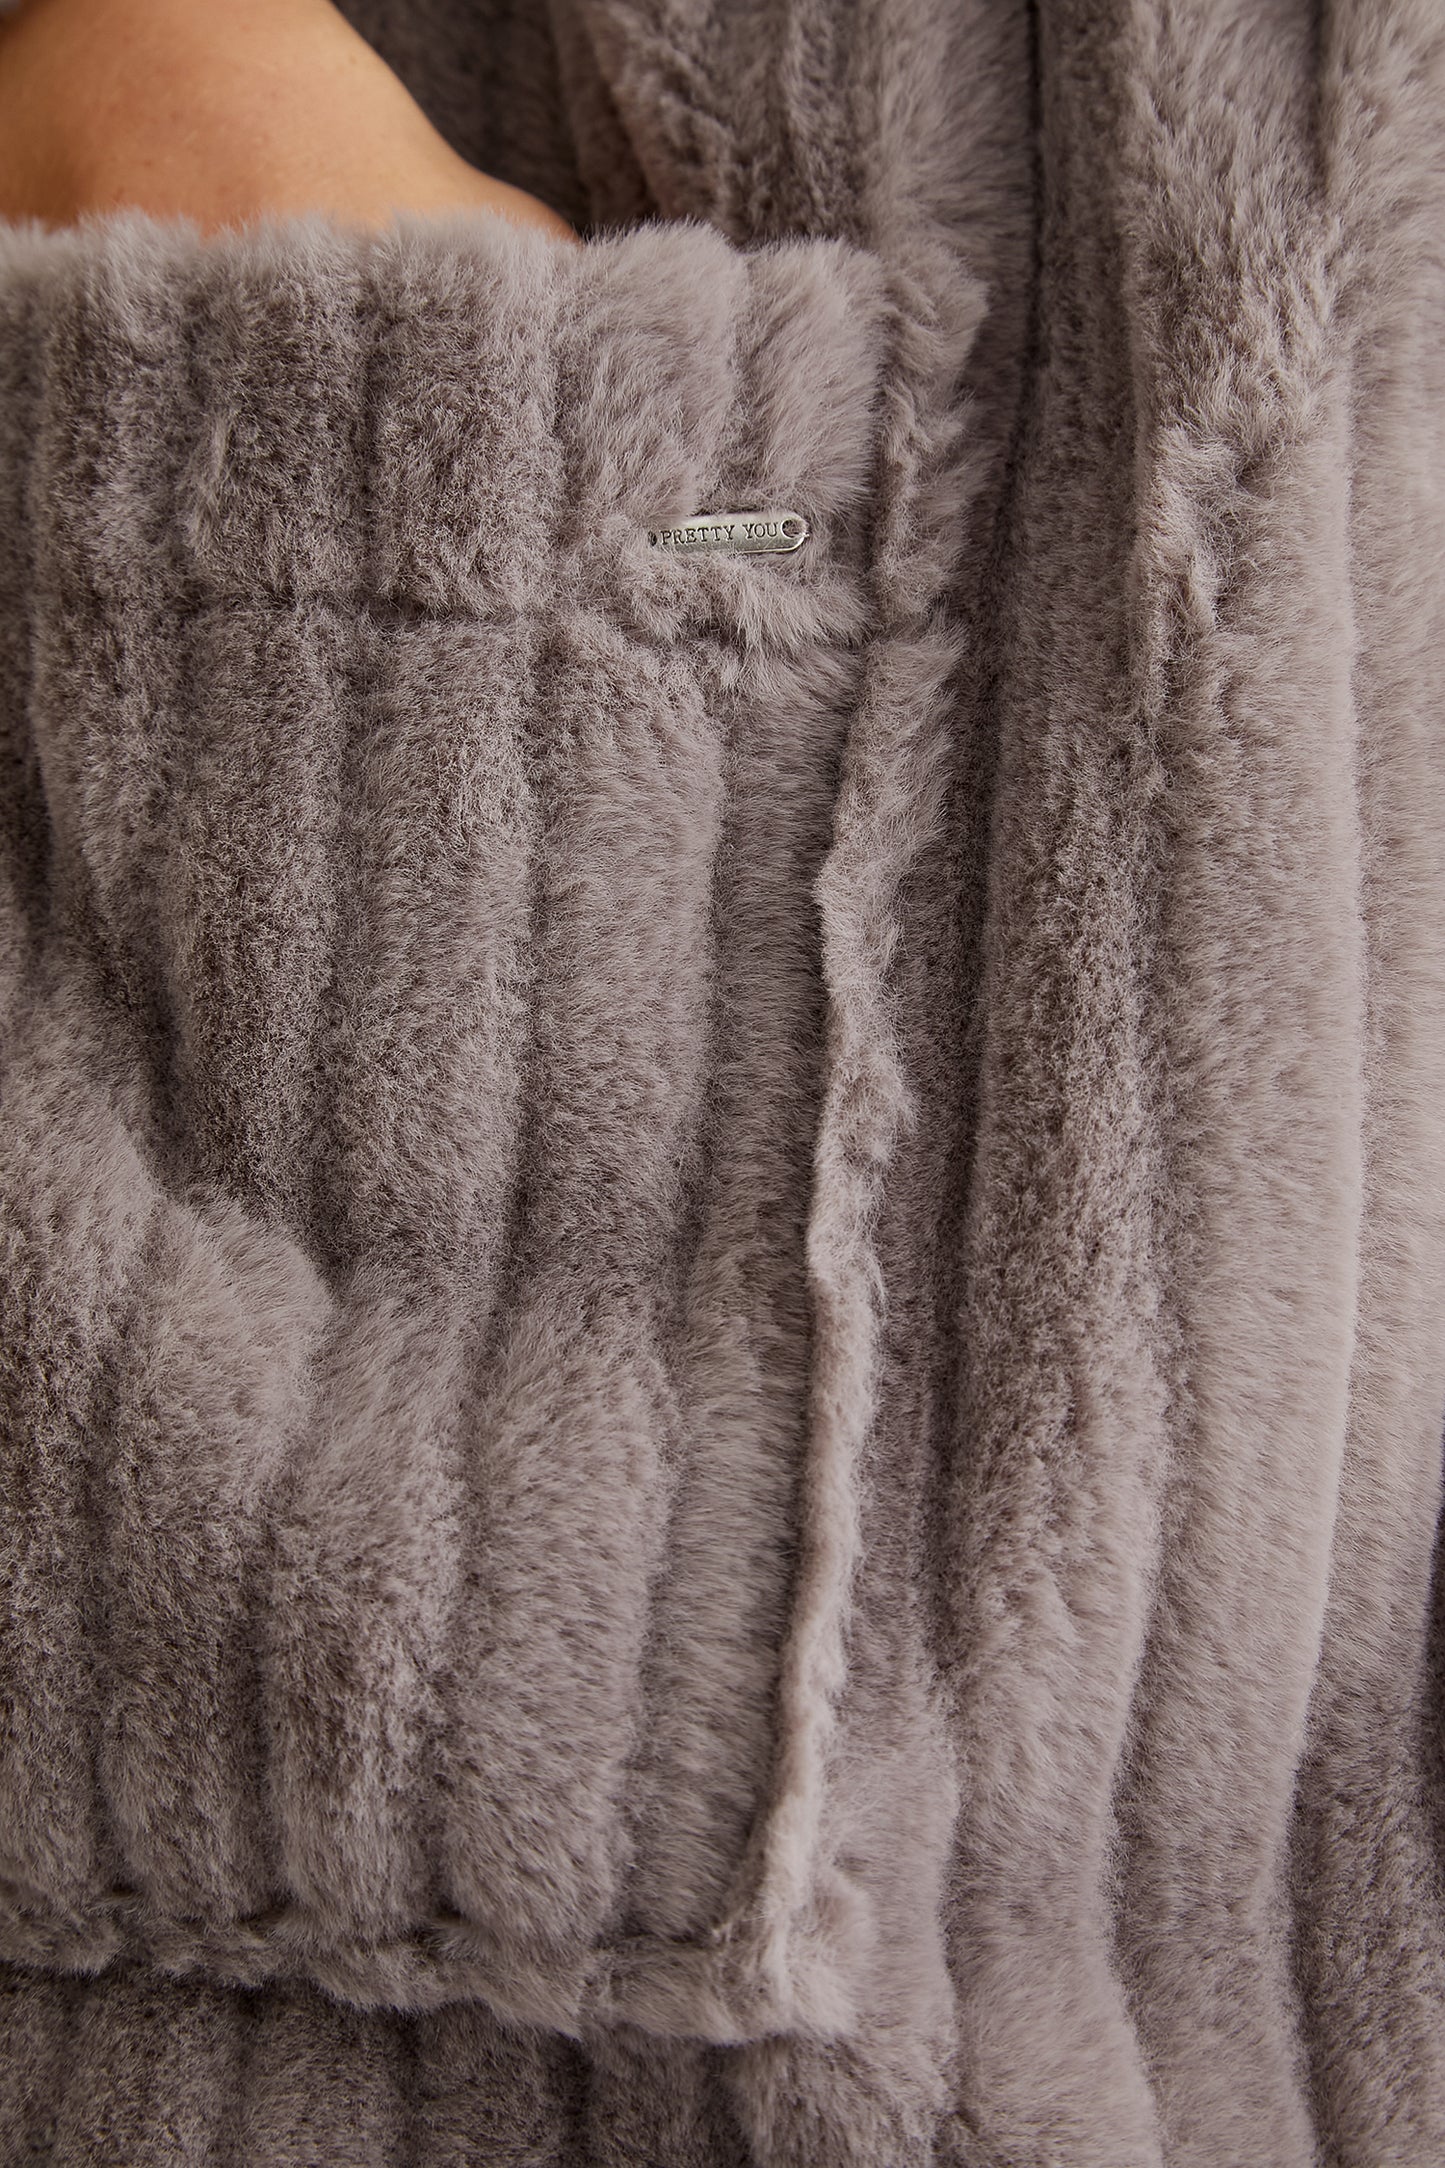 Women's Cloud Robe Dressing Gown in Mink with oversized hood from Pretty You London